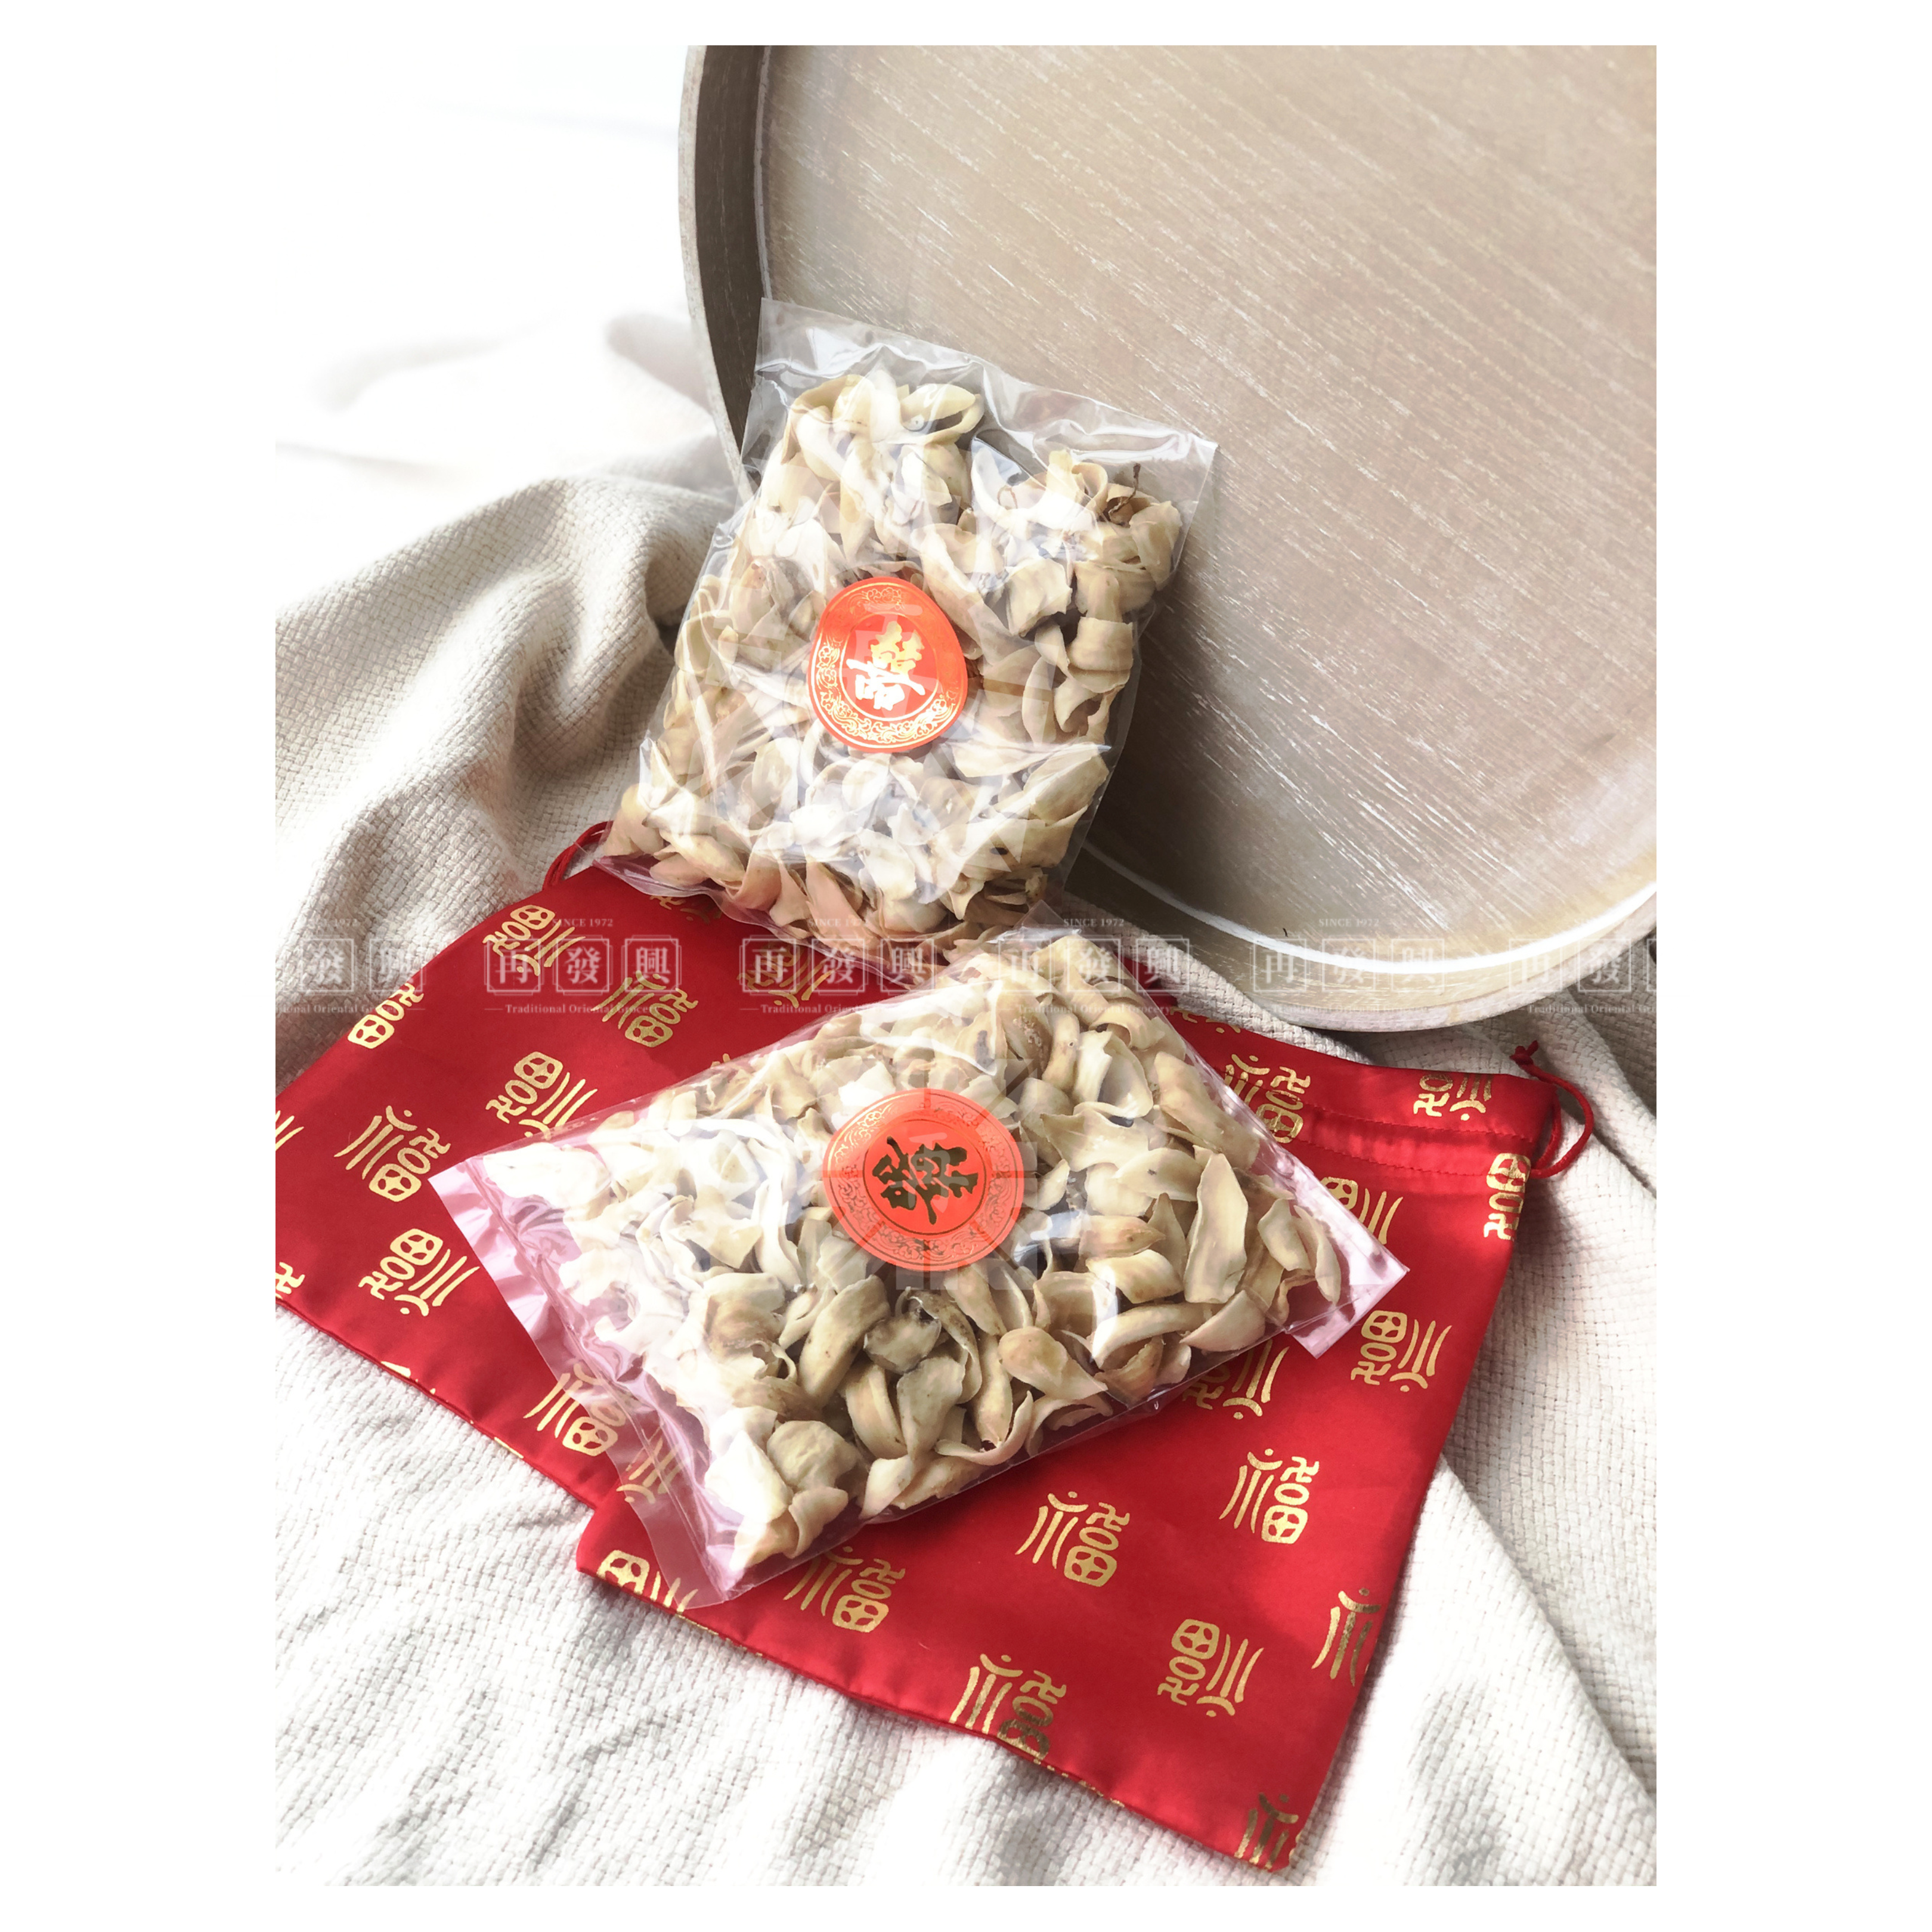 Betrothal Pack: Dried Lily Flower Bulb 百合 (100g x 2)